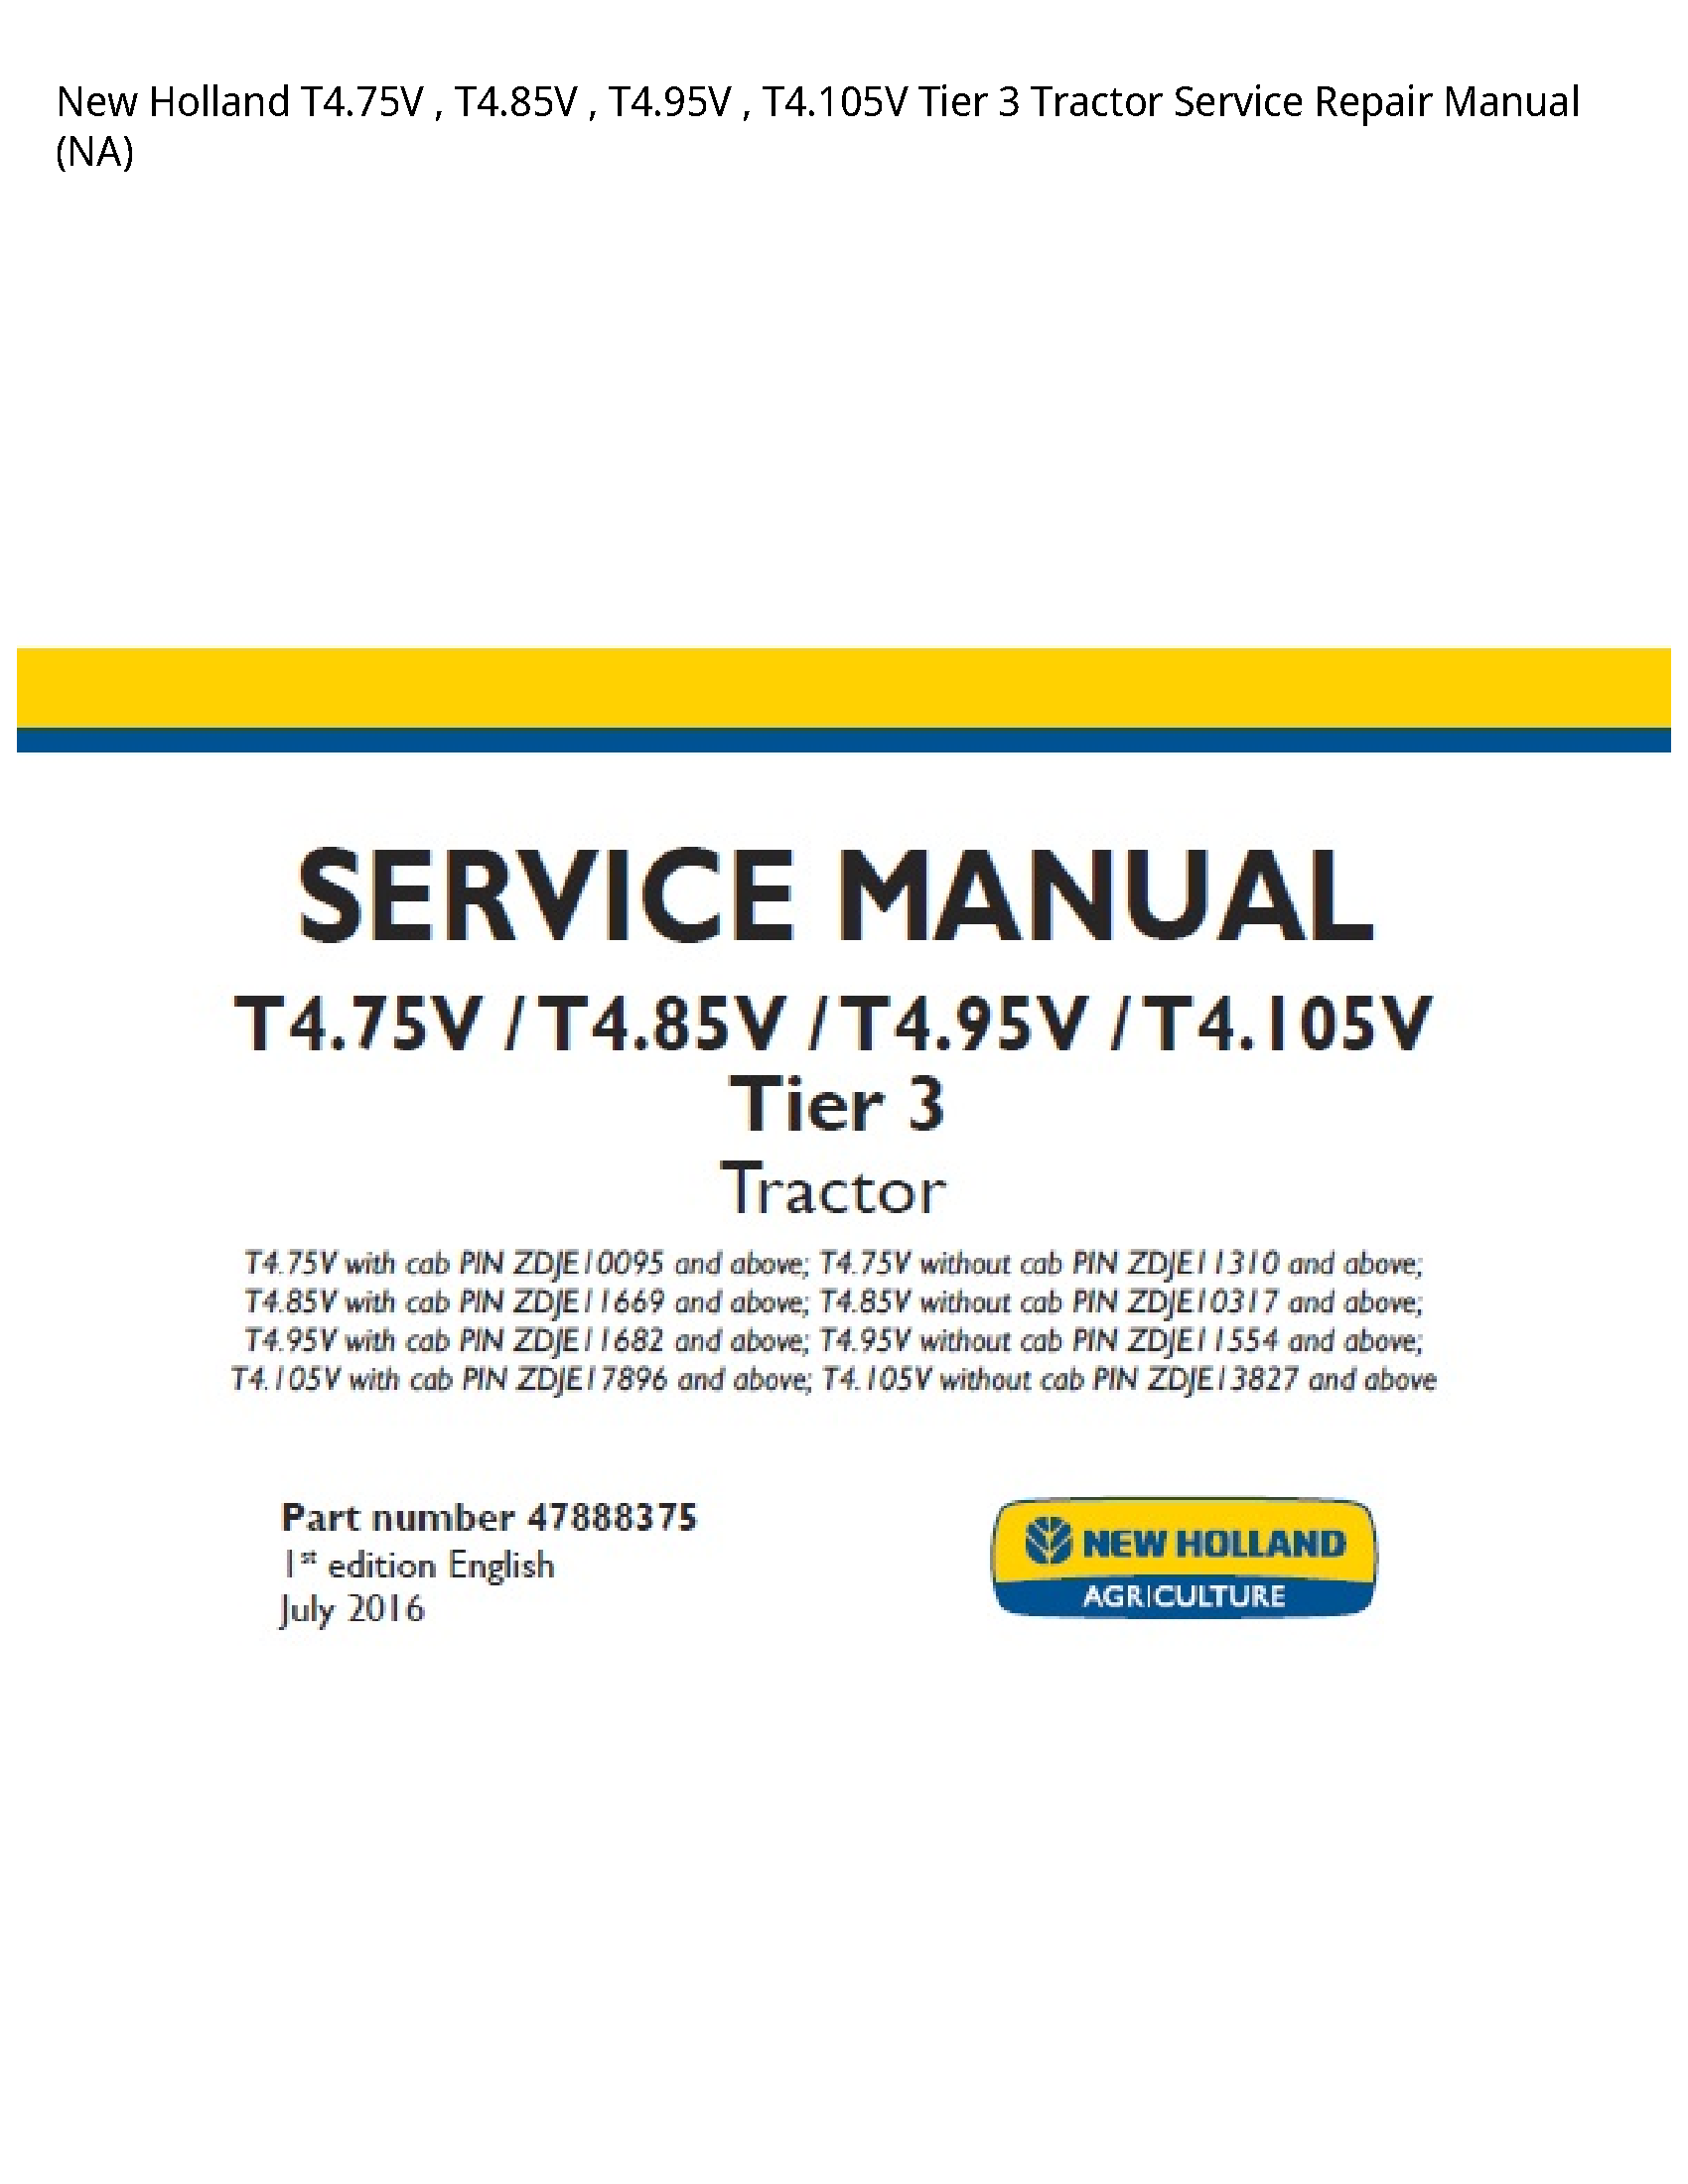 New Holland T4.75V Tier Tractor manual